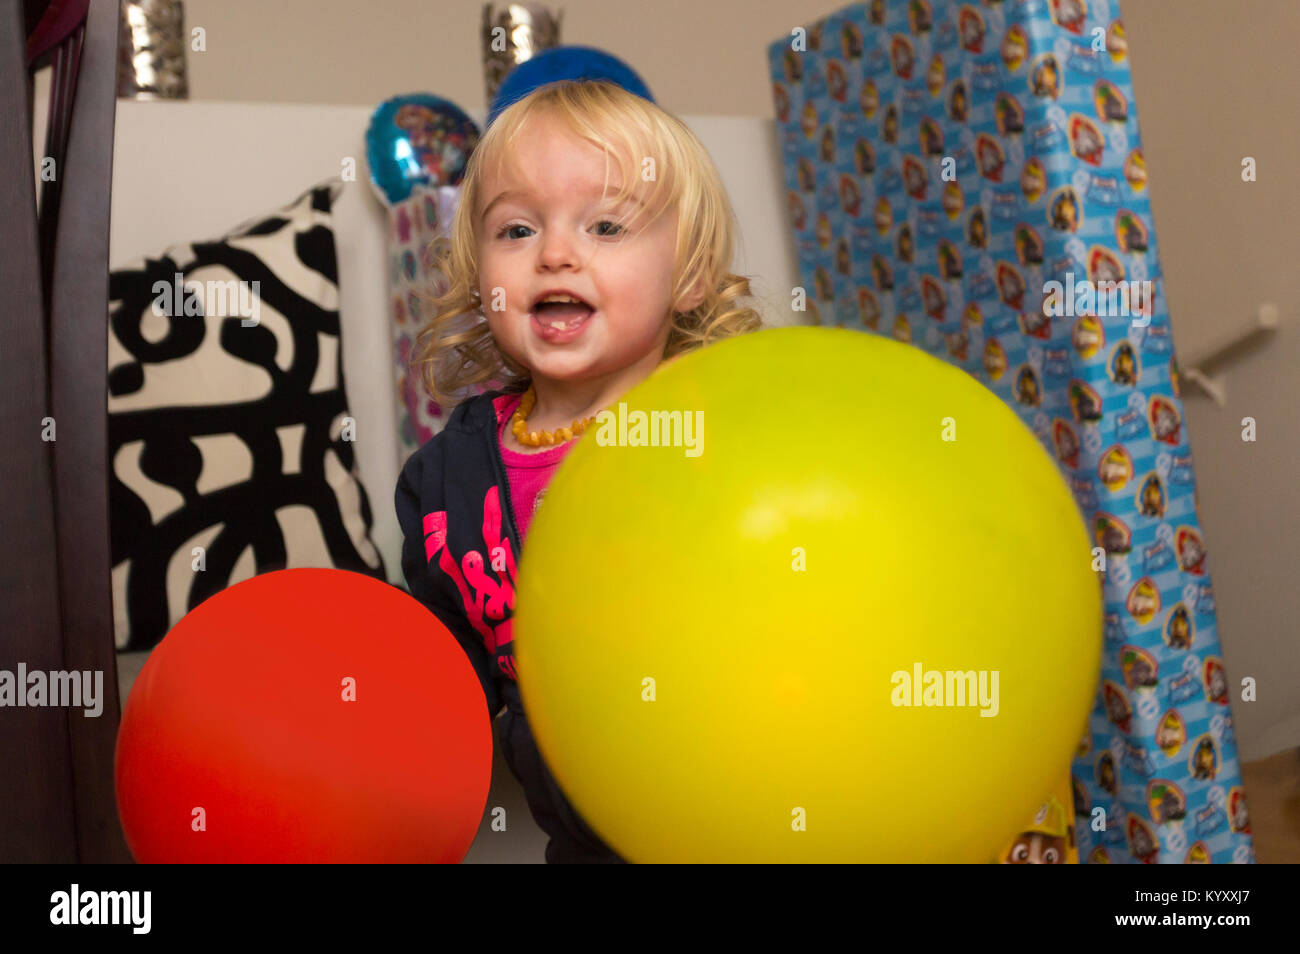 Happy 2 year old girl with balloons Banque D'Images